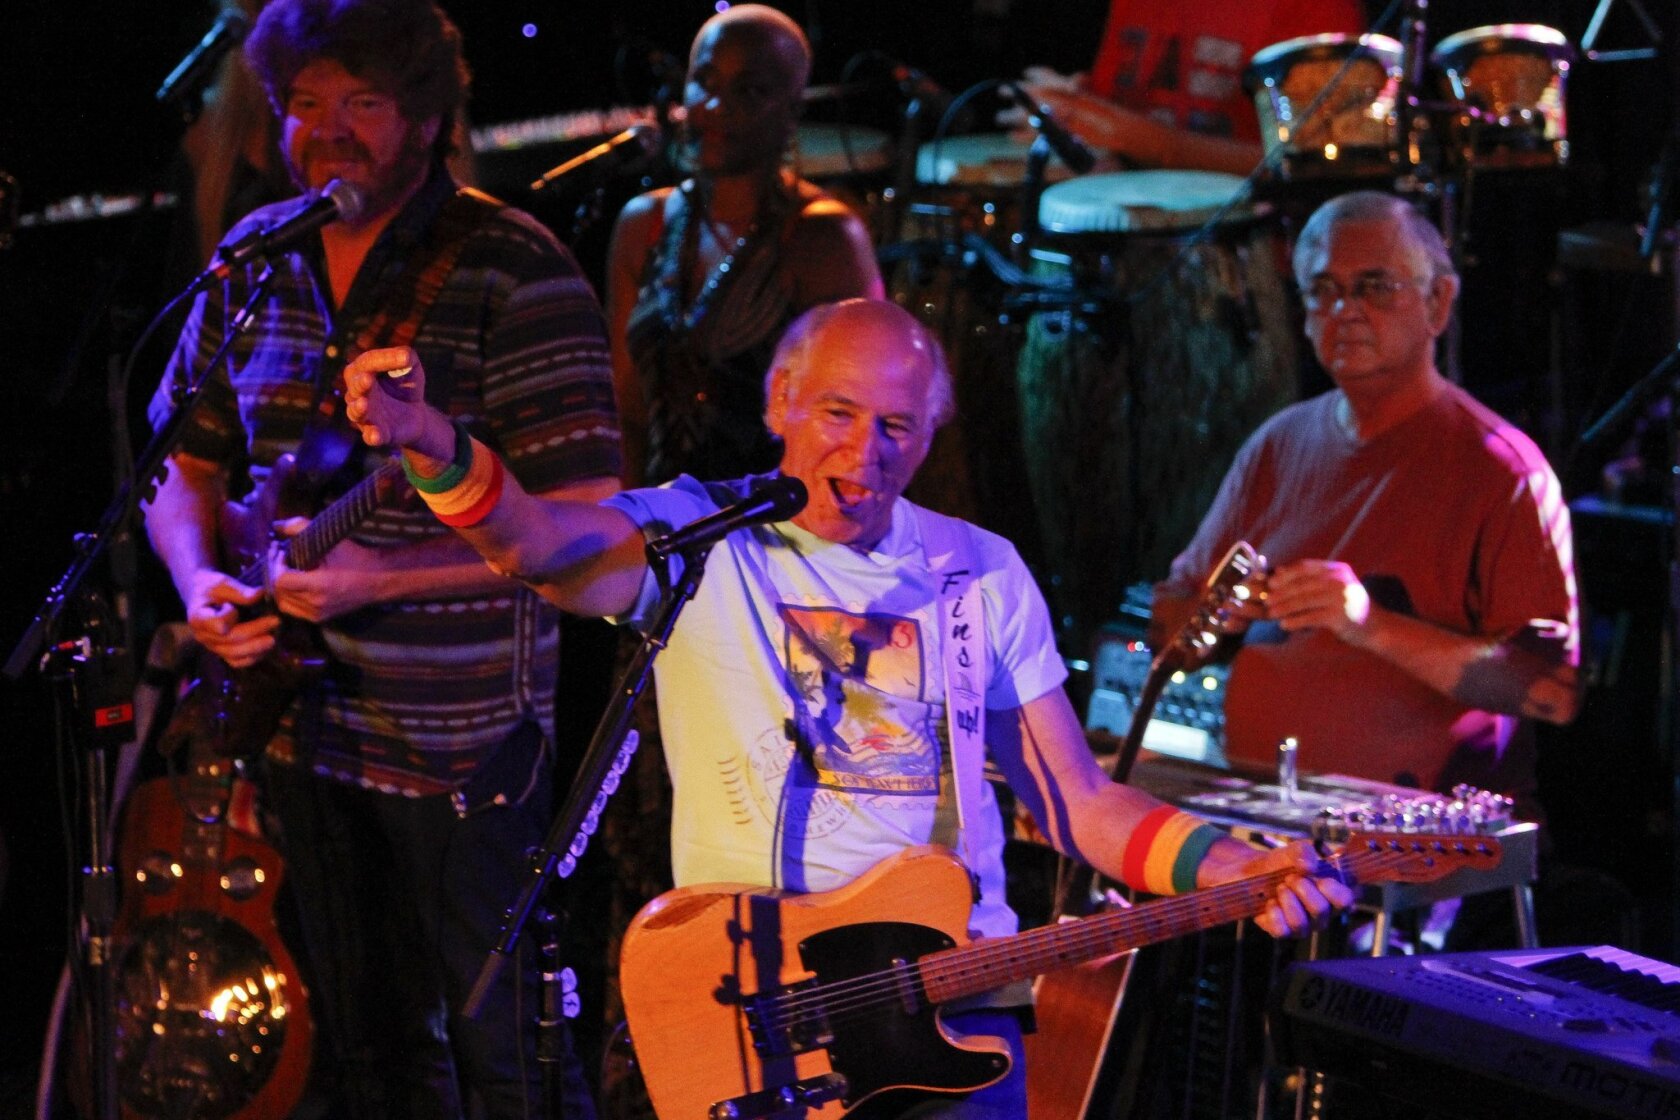 Jimmy Buffett at Belly Up? Unbelievable! The San Diego UnionTribune